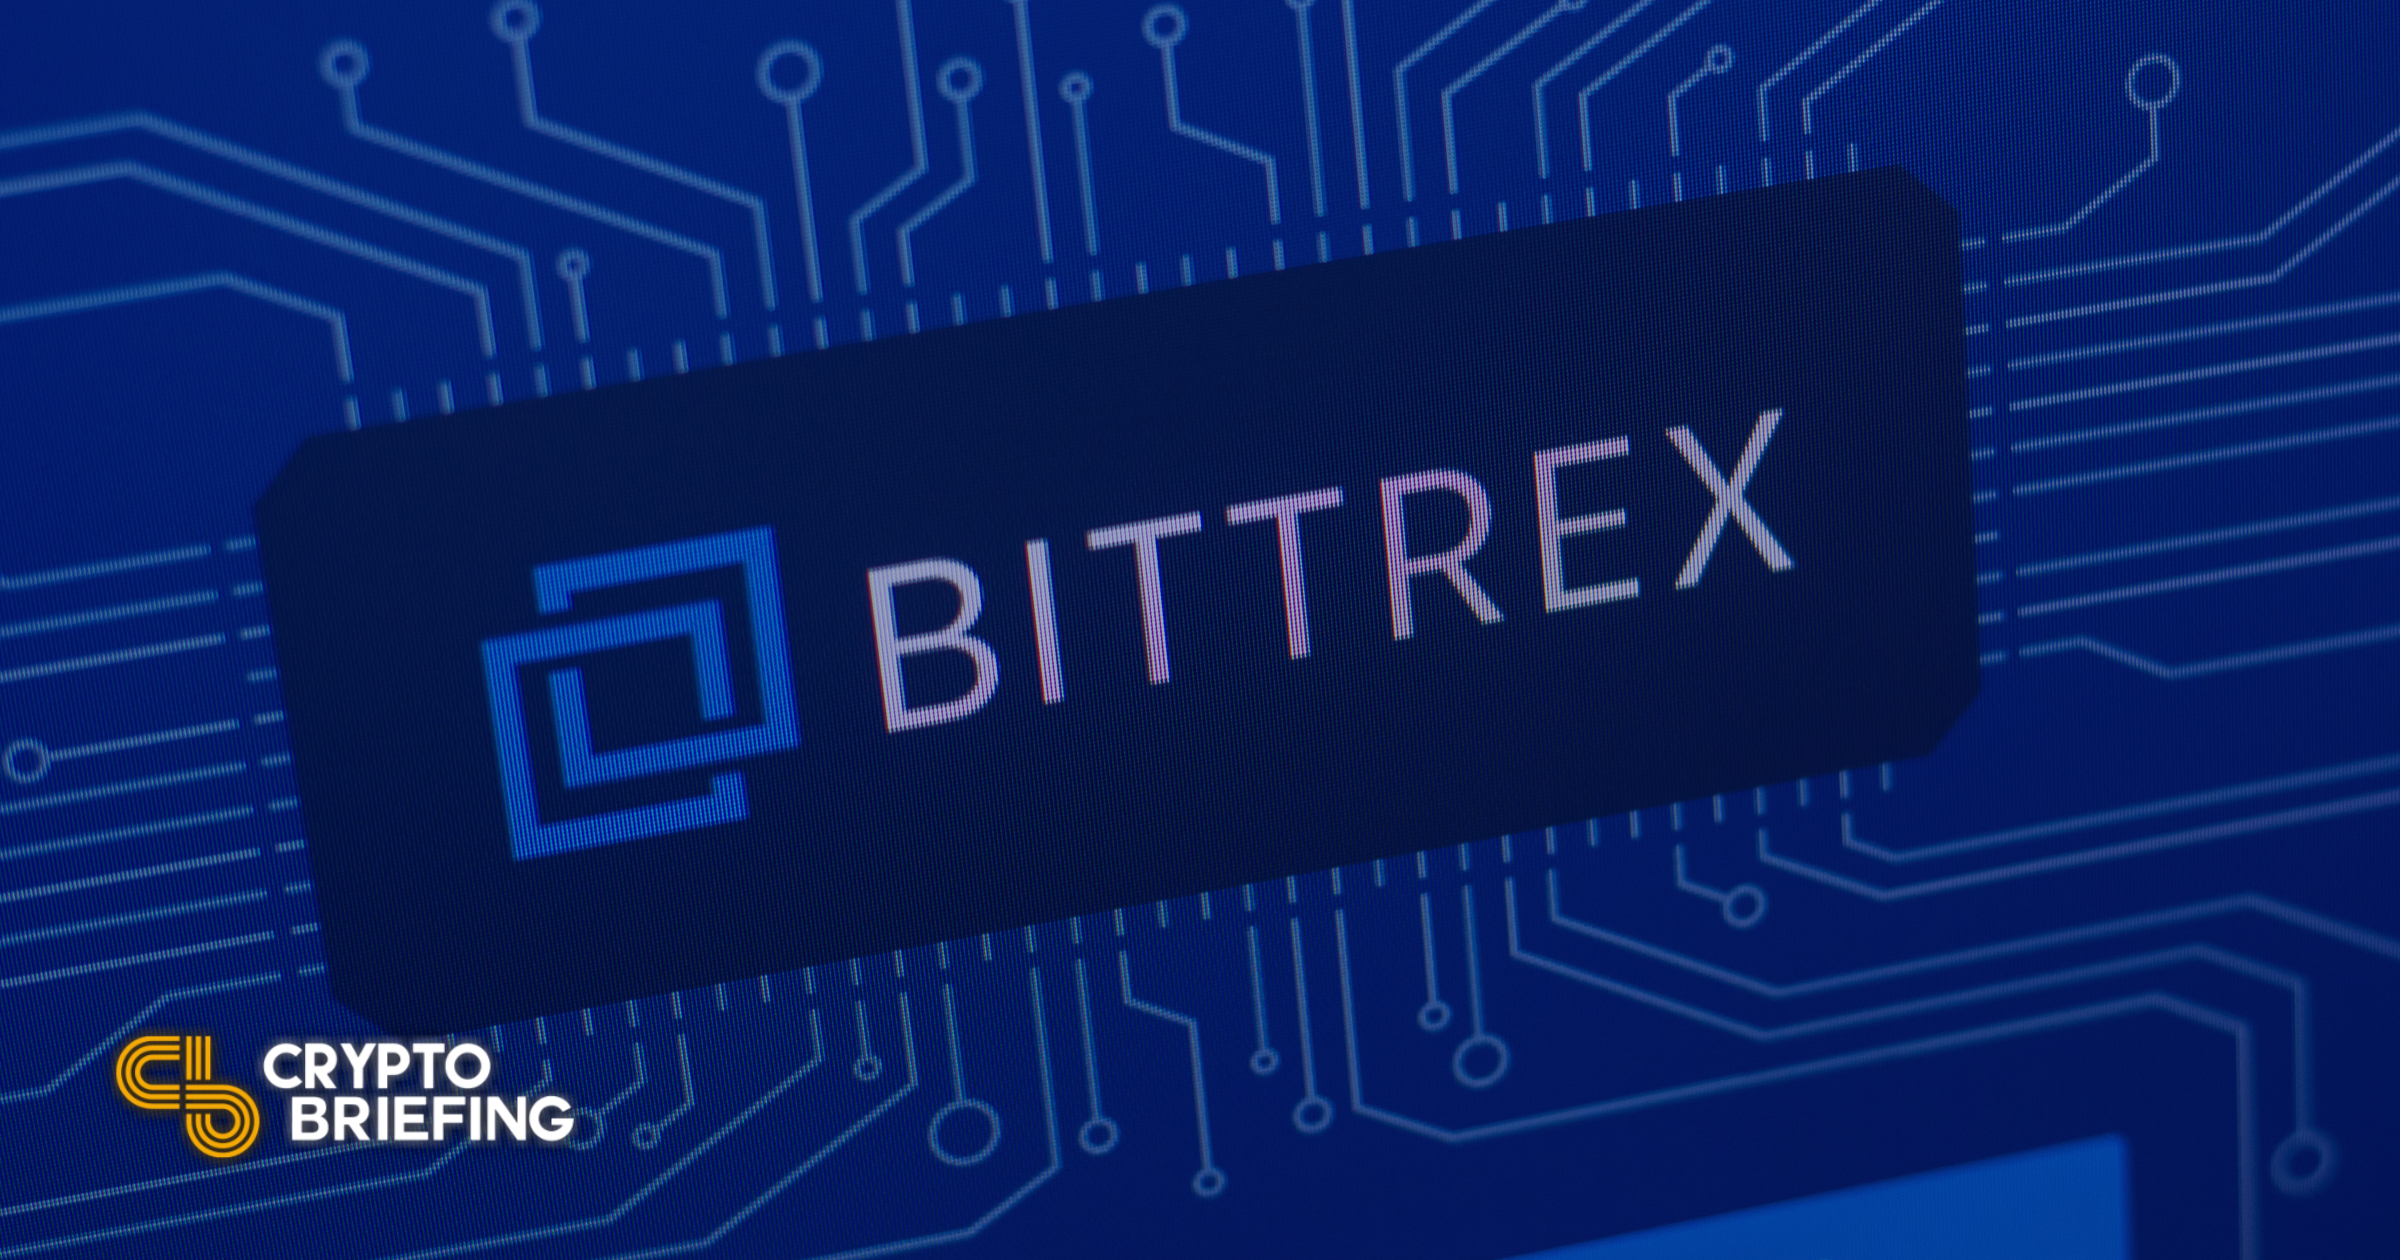 Withdraw the other cryptocurrency from Bittrex to your own personal wallet.